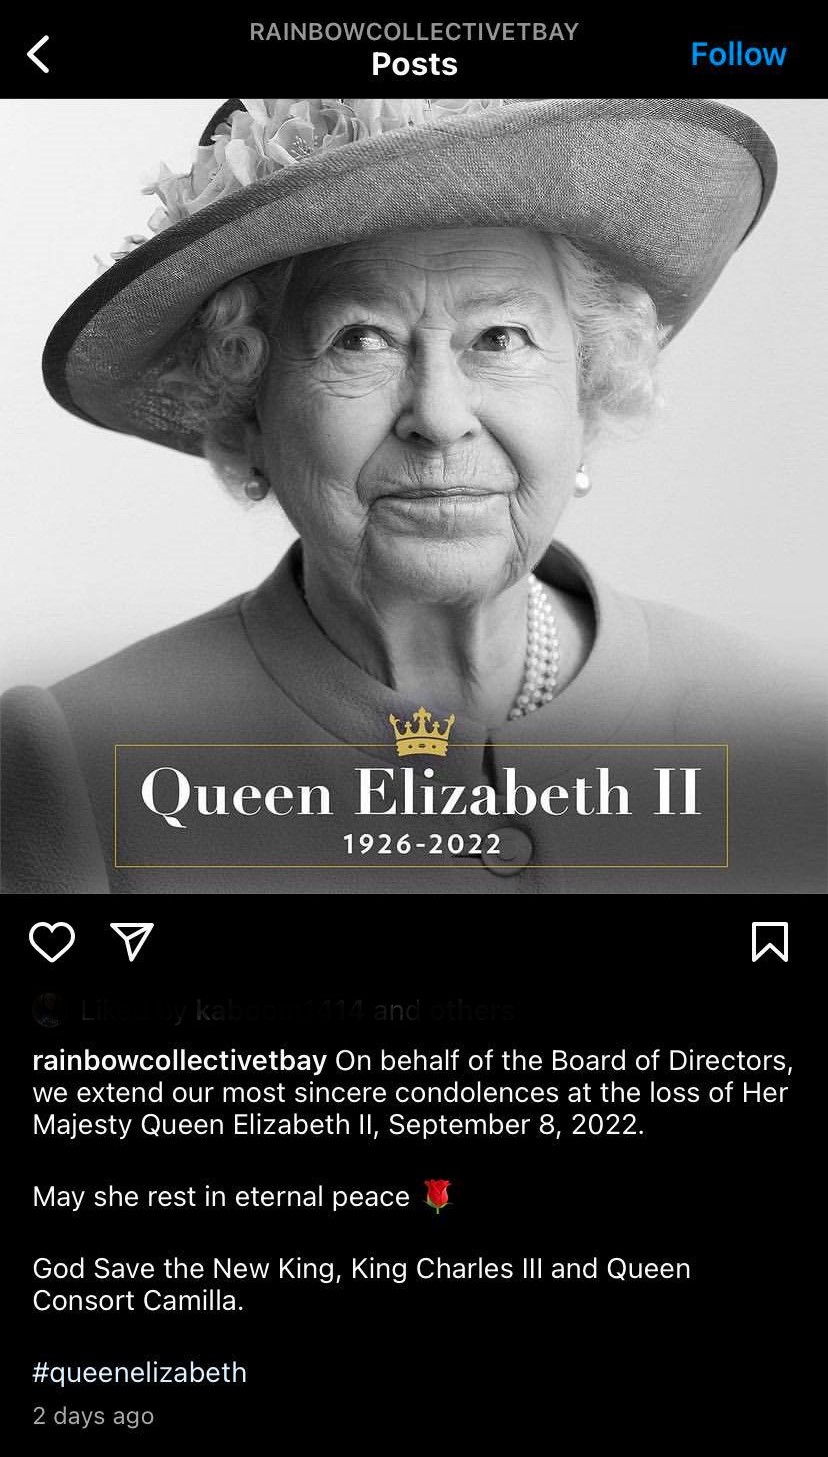 Screenshot from a now-deleted Instagram post by @rainbowcollectivetbay. The post extends condolences to the royal family for the death of Queen Elizabeth and wishes 'God Save the New King' to King Charles and Queen Consort Camilla.